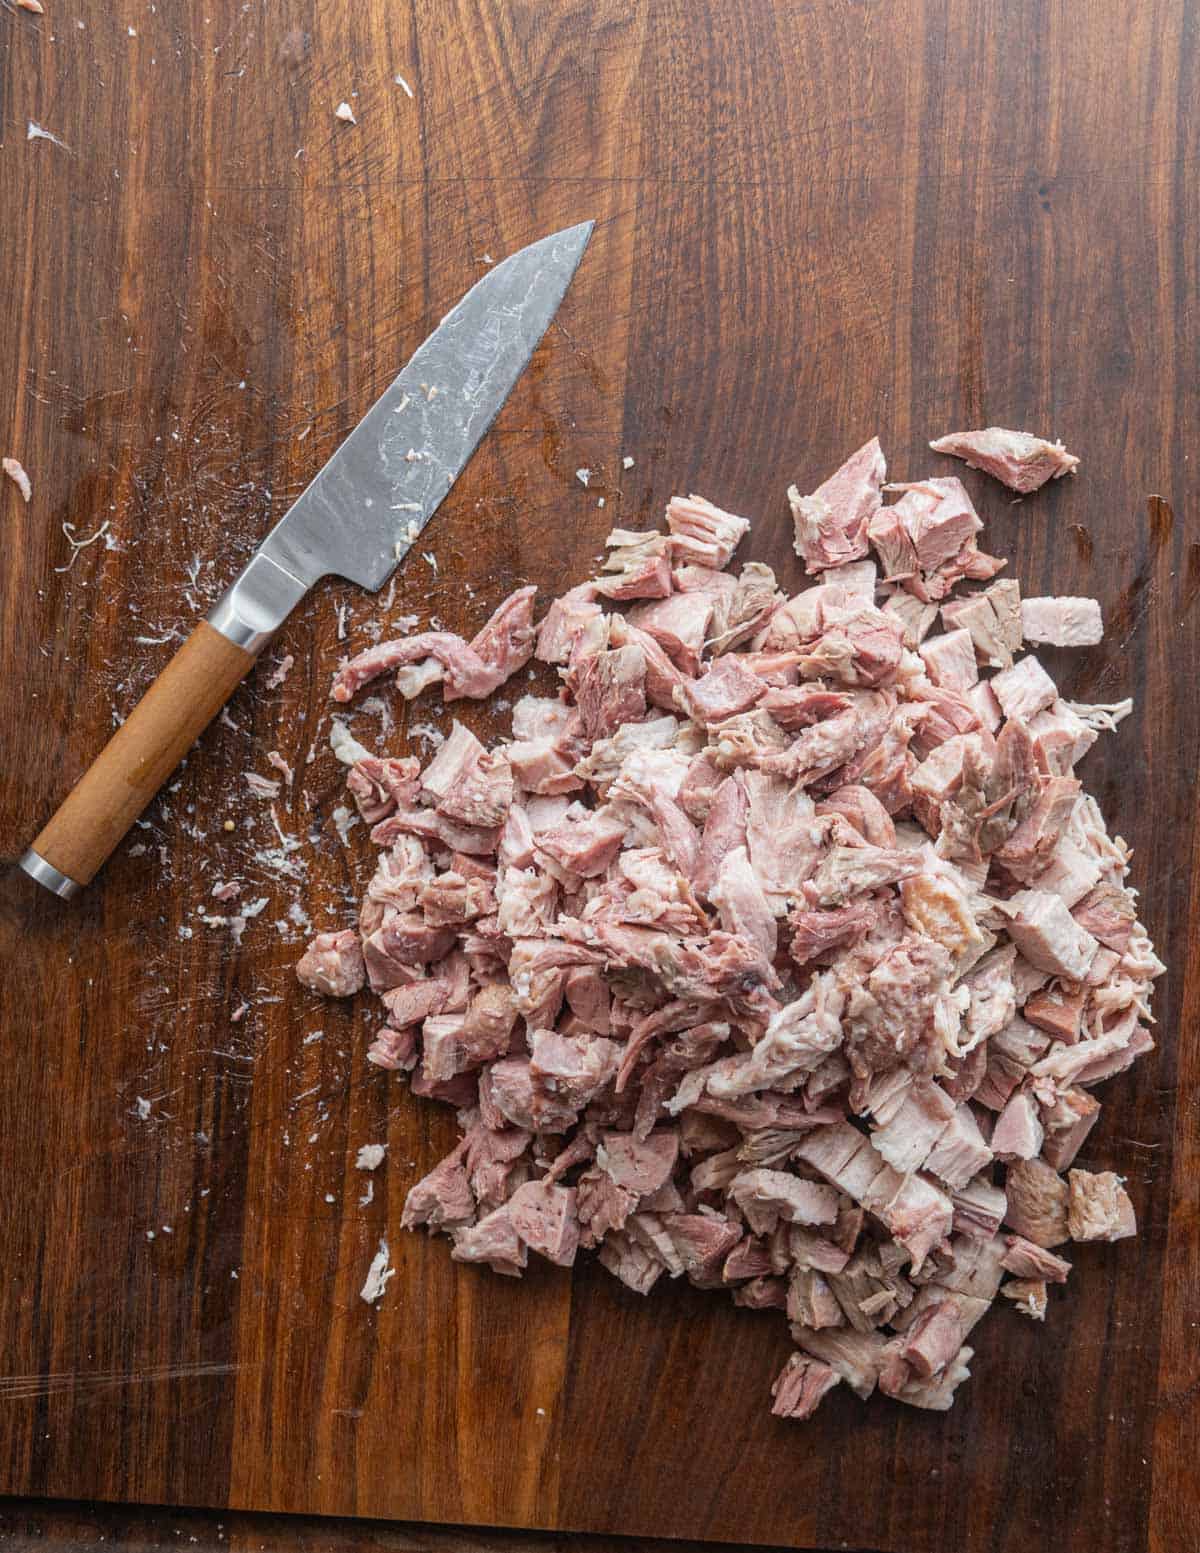 A utility knife next to diced pieces of pork jowl and pig head meat. 